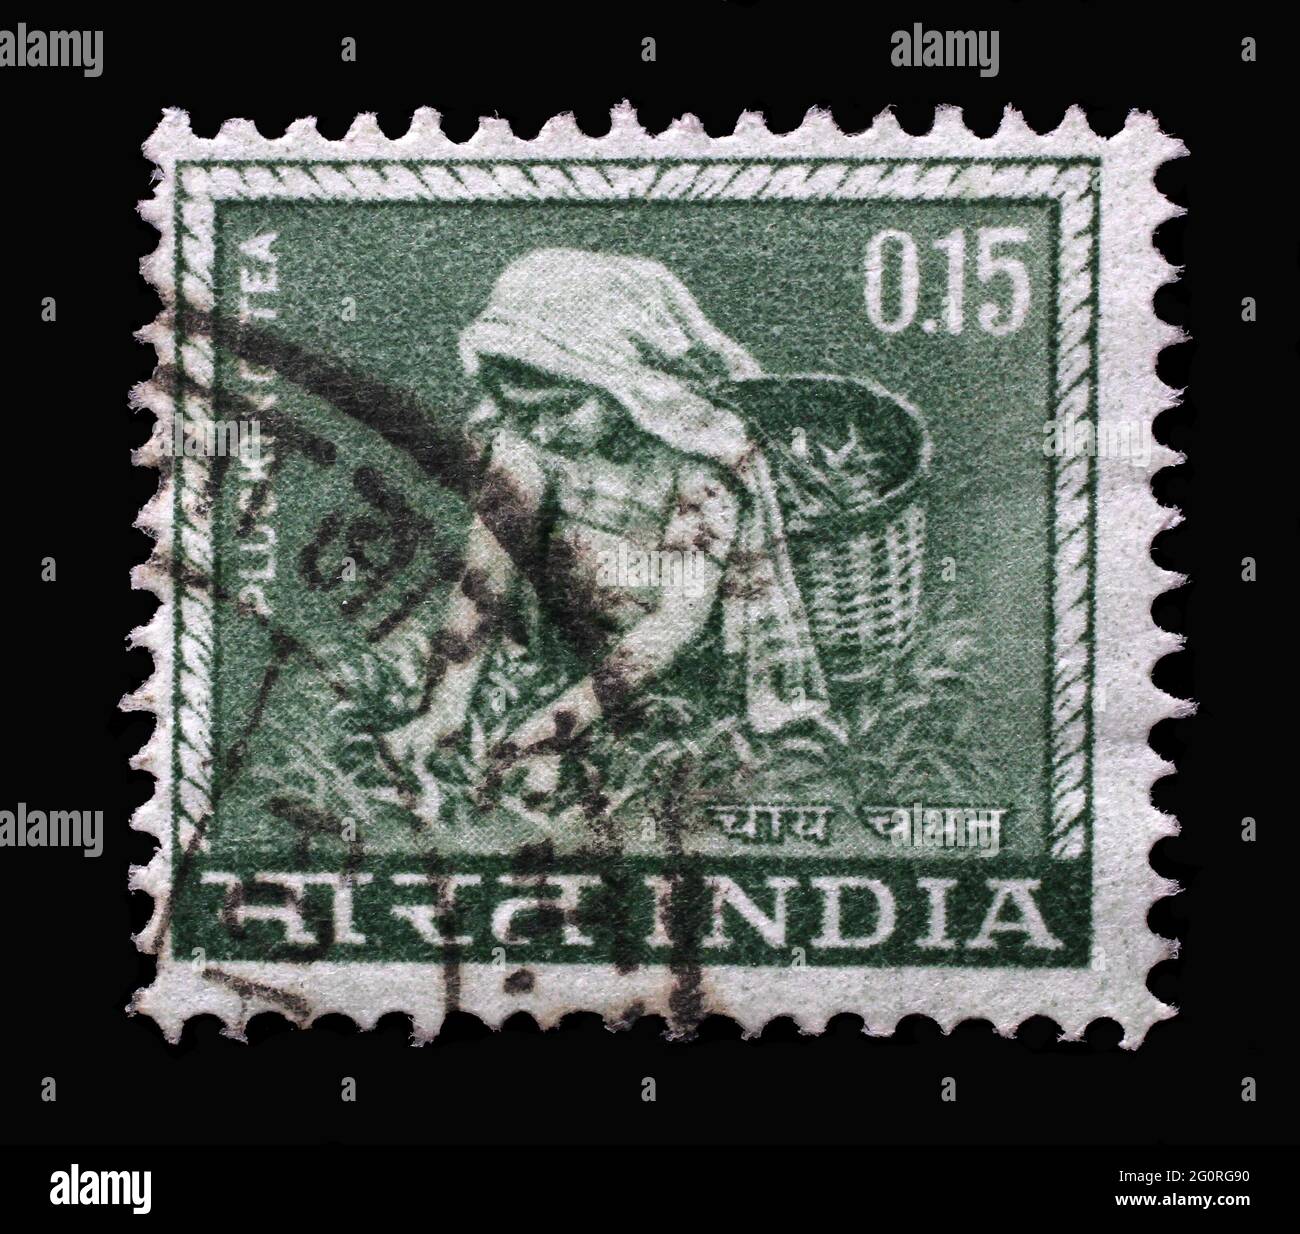 Stamp printed in India shows woman plucking tea, from the series 'Definitive stamps', circa 1965 Stock Photo